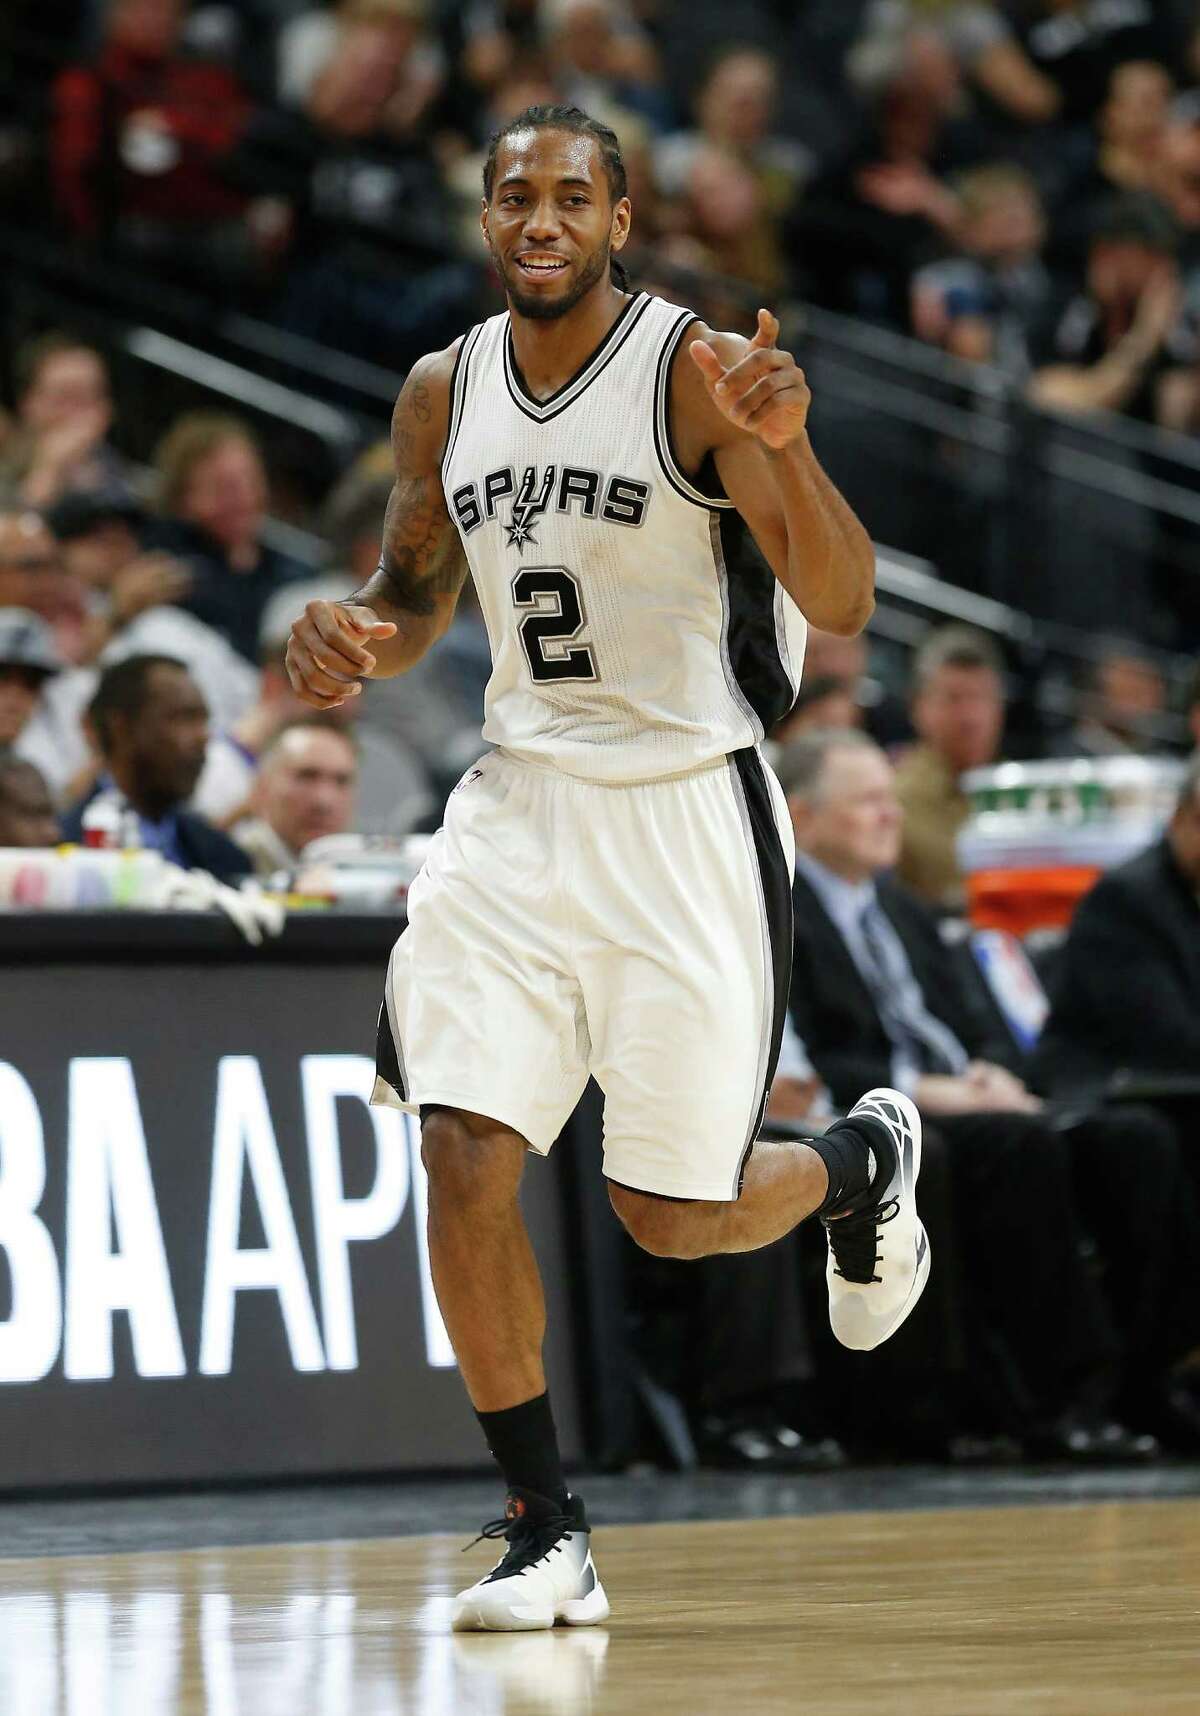 Spurs' Kawhi Leonard (02) smiles after a score against the Detroit Pistons at the AT&T Center on Wednesday, Mar. 2, 2016. Spurs defeated the Pistons, 97-81. (Kin Man Hui/San Antonio Express-News)